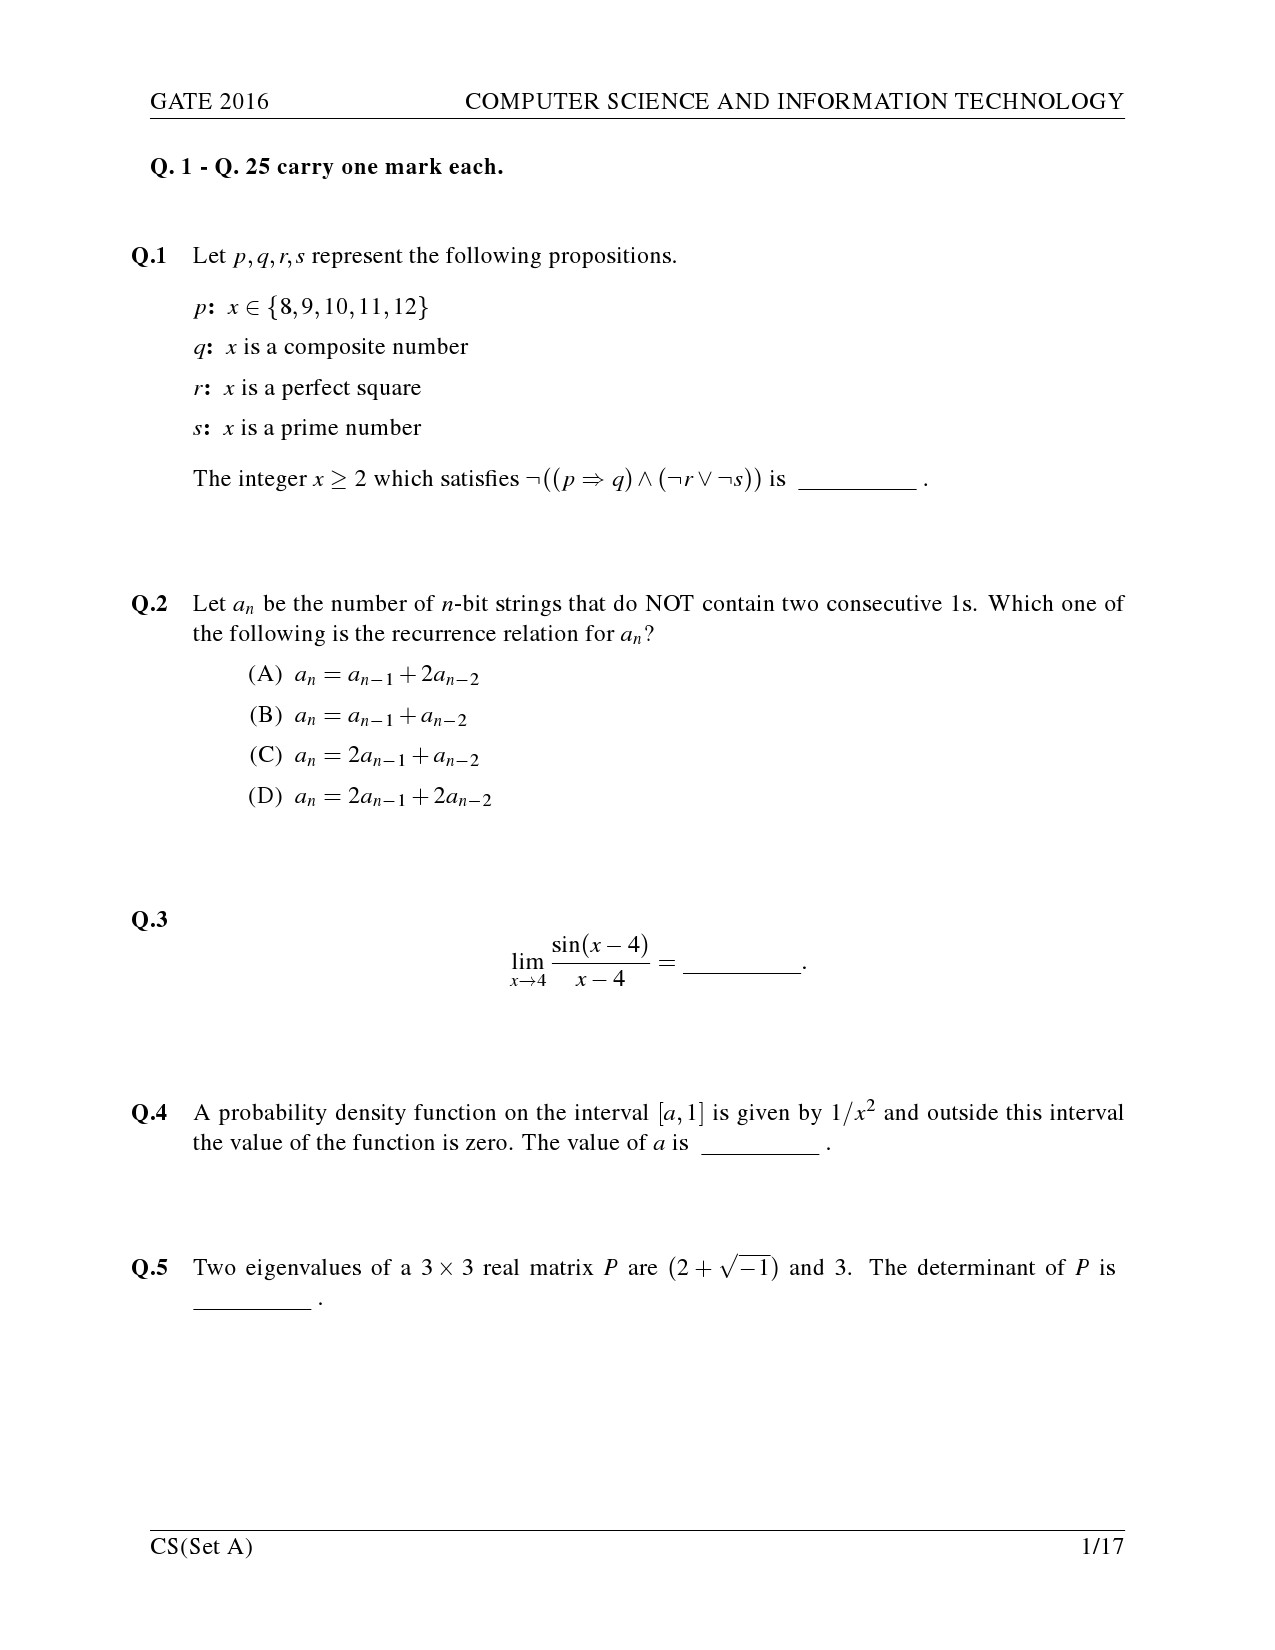 GATE Exam Question Paper 2016 Computer Science and Information Technology Set A 4